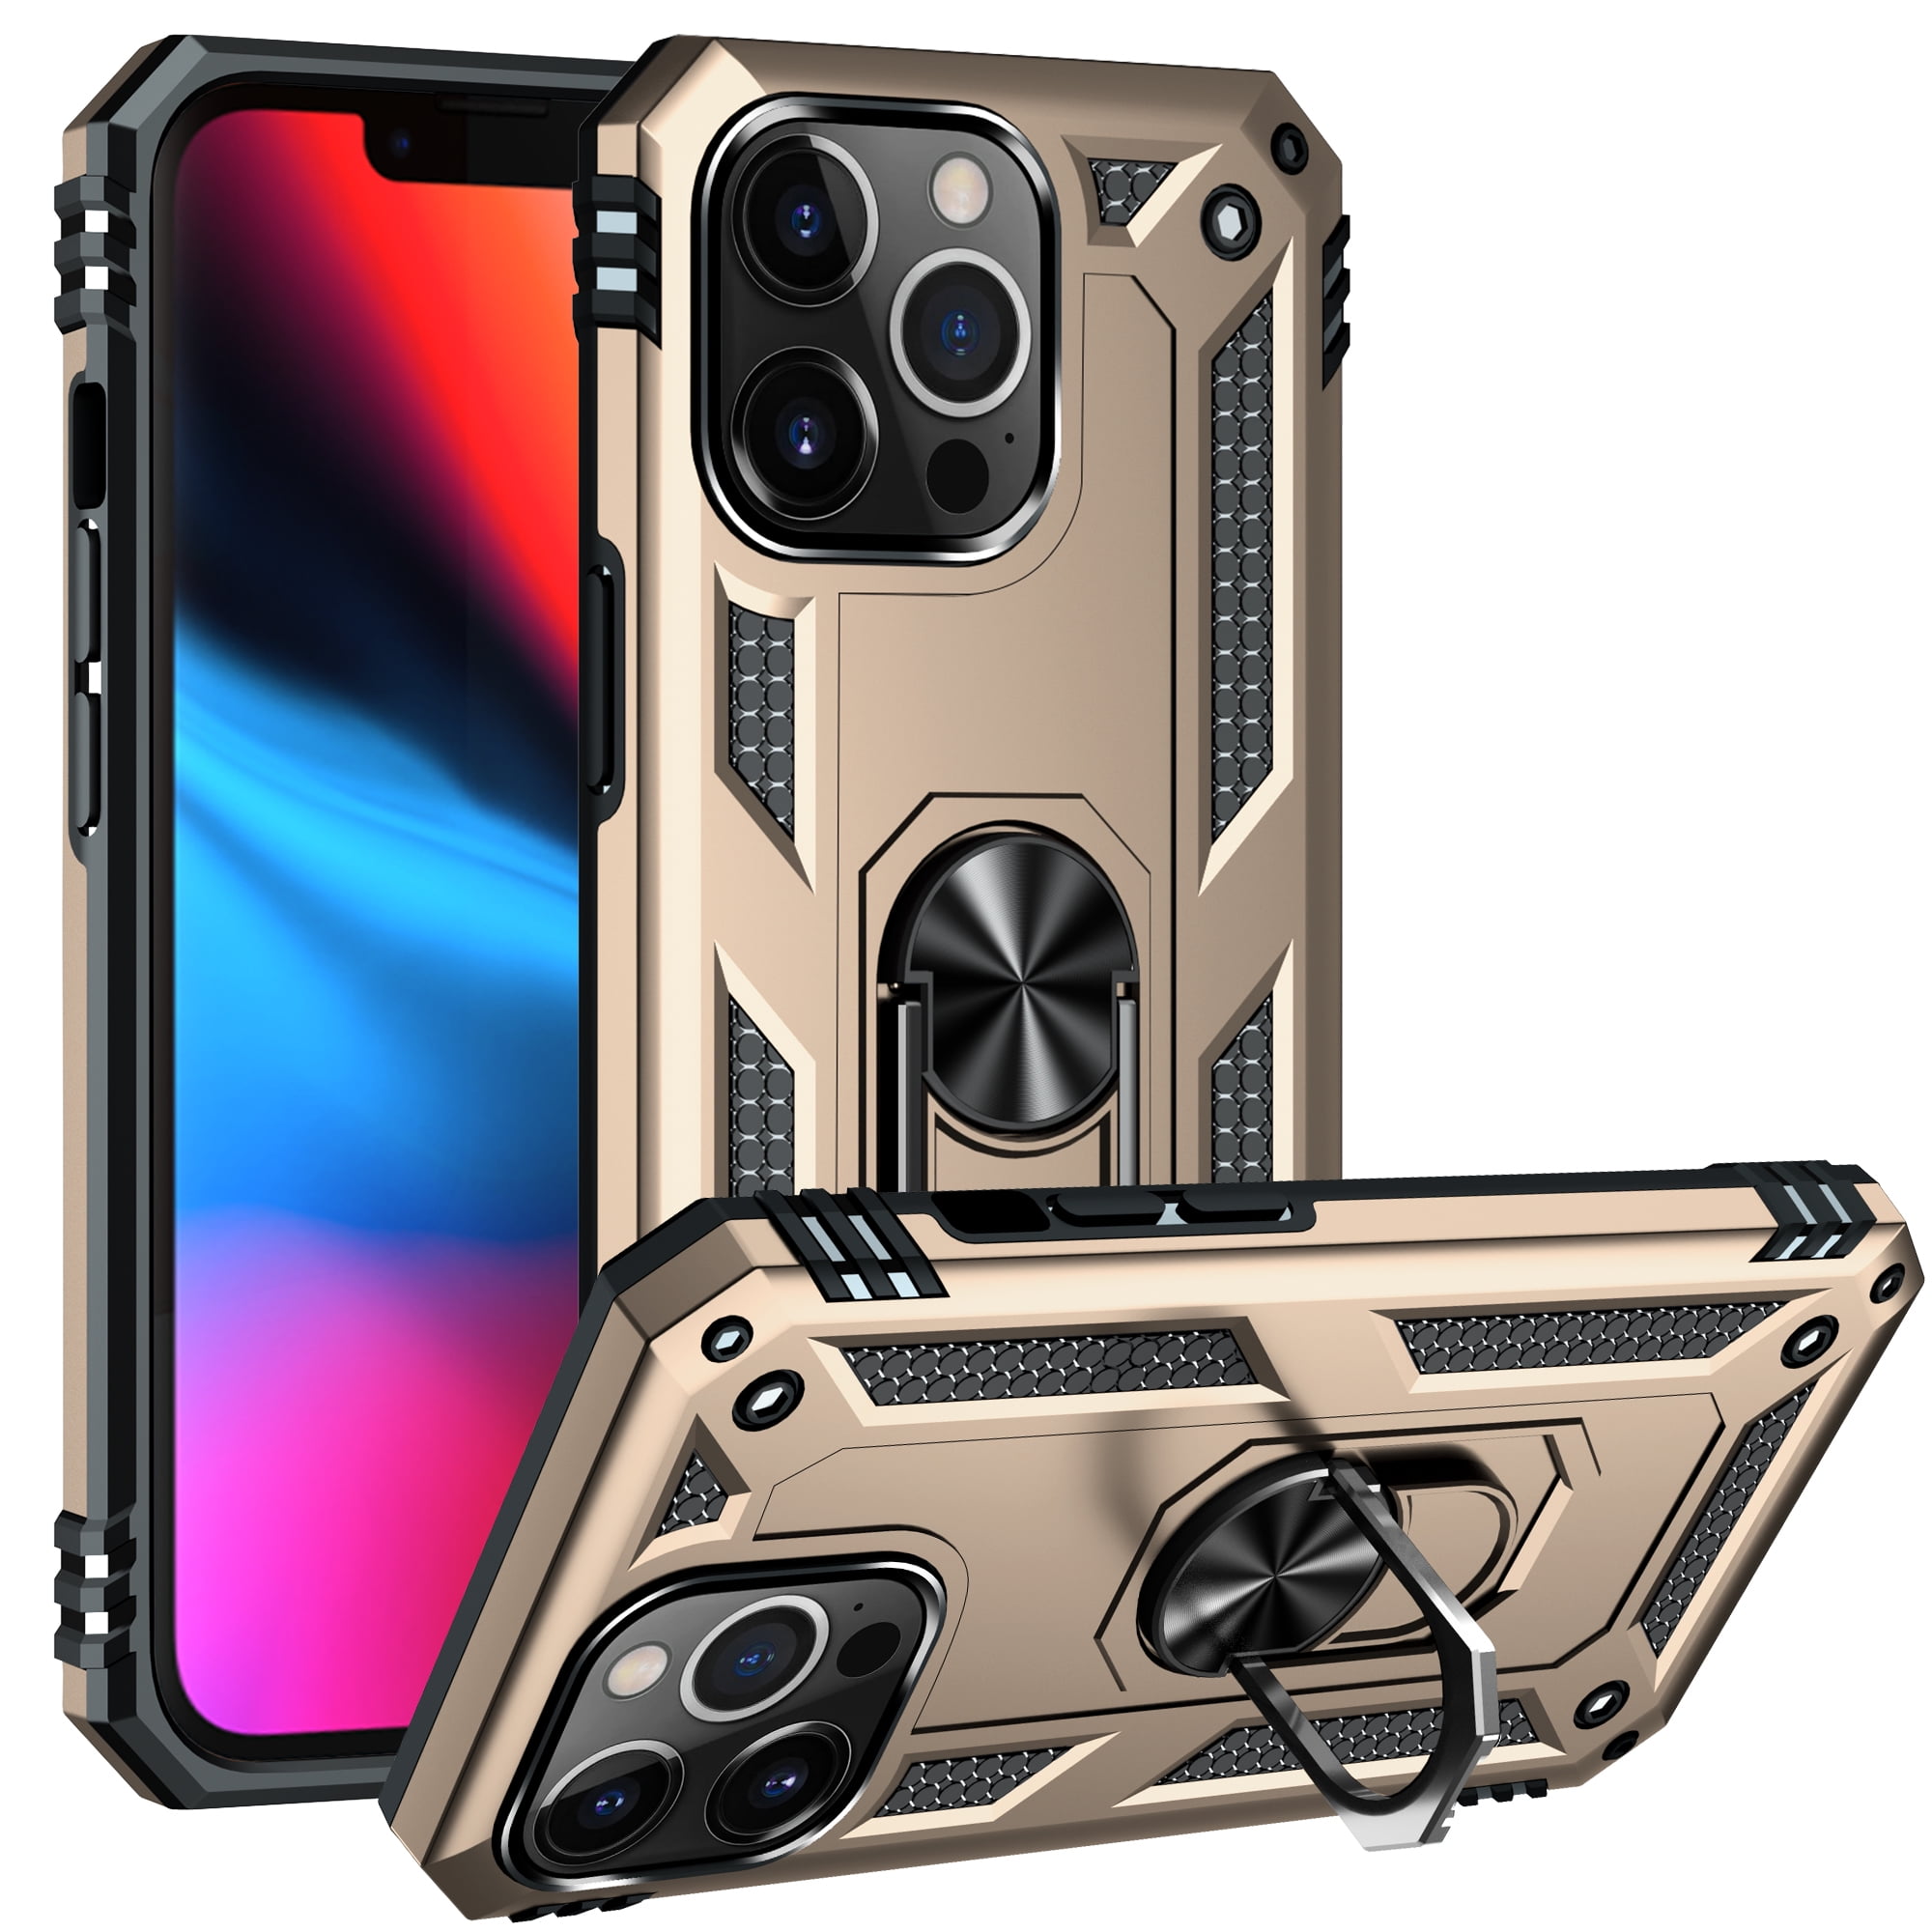 Clear Back Shockproof Cover Case for iPhone 13 Pro Max 2021,Rose Gold WWW Case Compatible with iPhone 13 Pro Max Case 6.7 with Built-in 360° Rotating Ring Kickstand Fit Magnetic Car Mount 